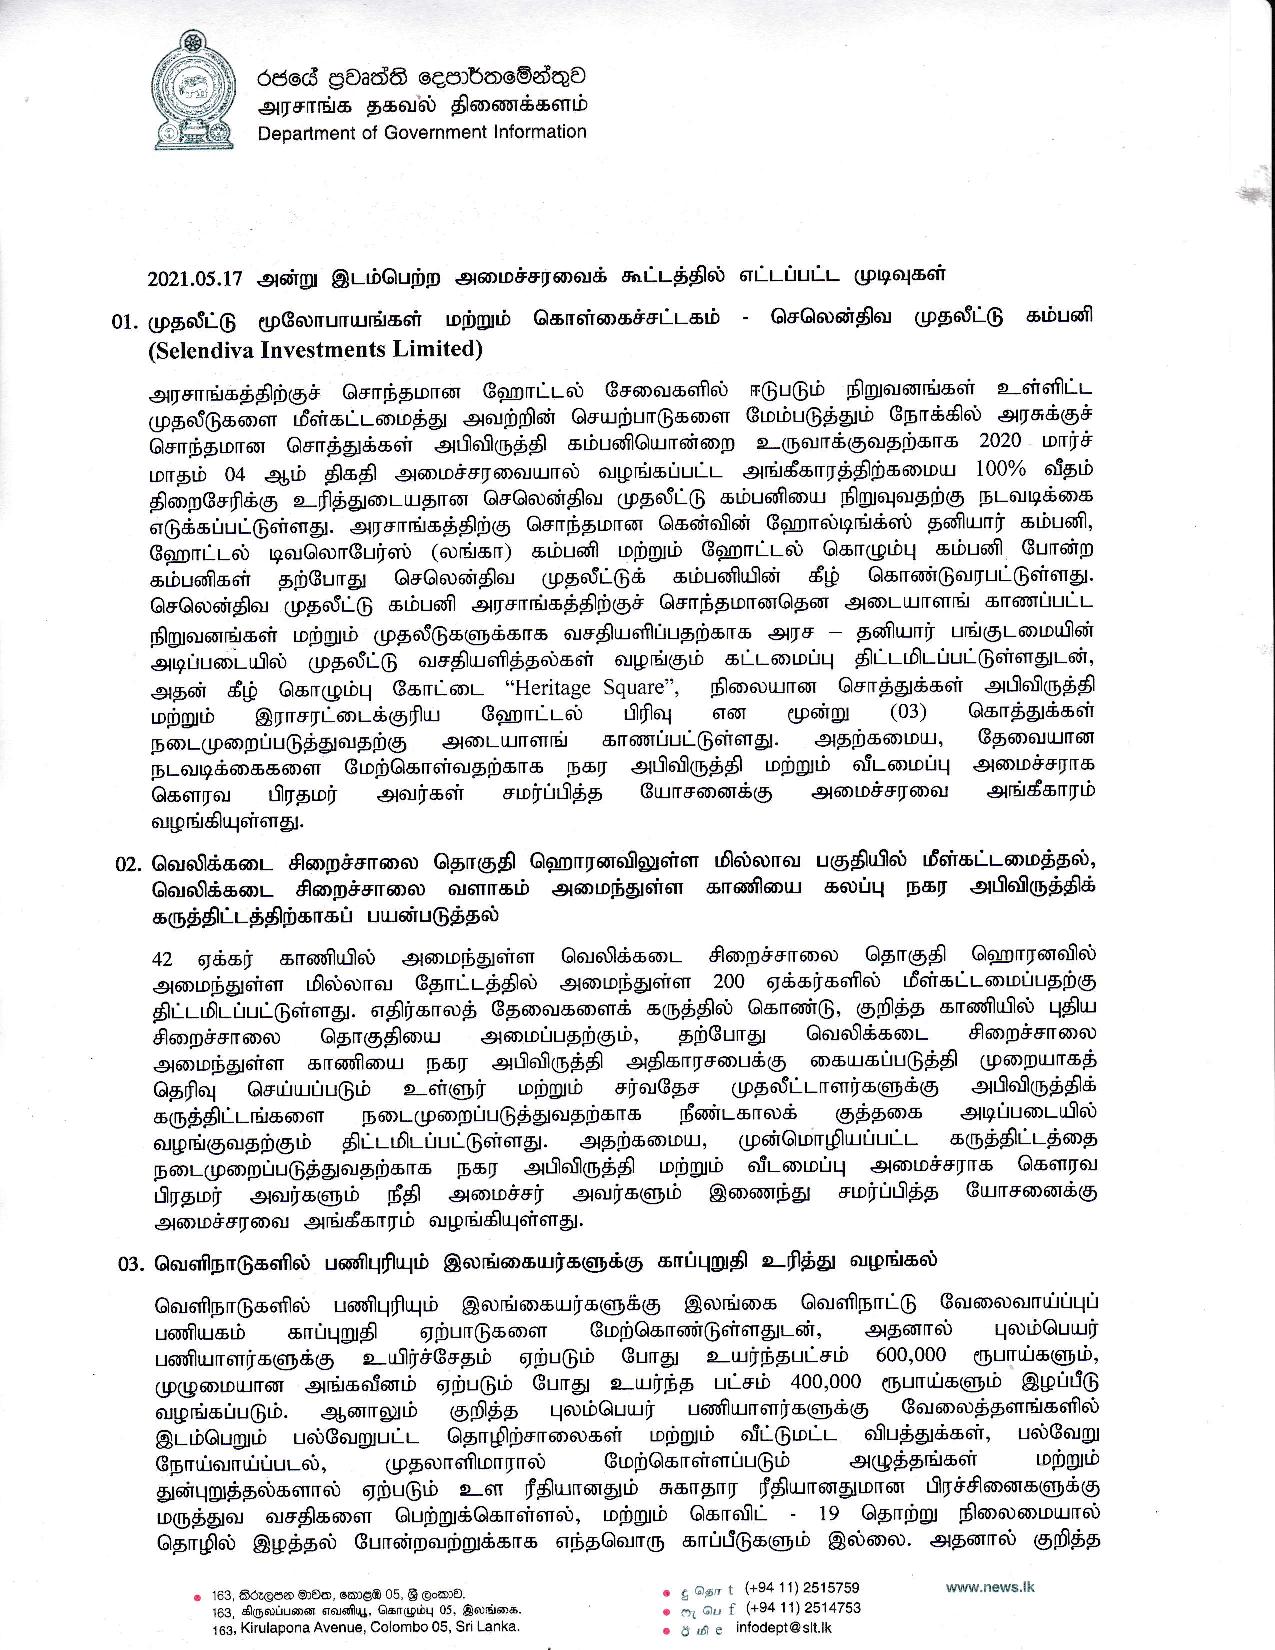 Cabinet Decision on 17.05.201 Tamil page 001